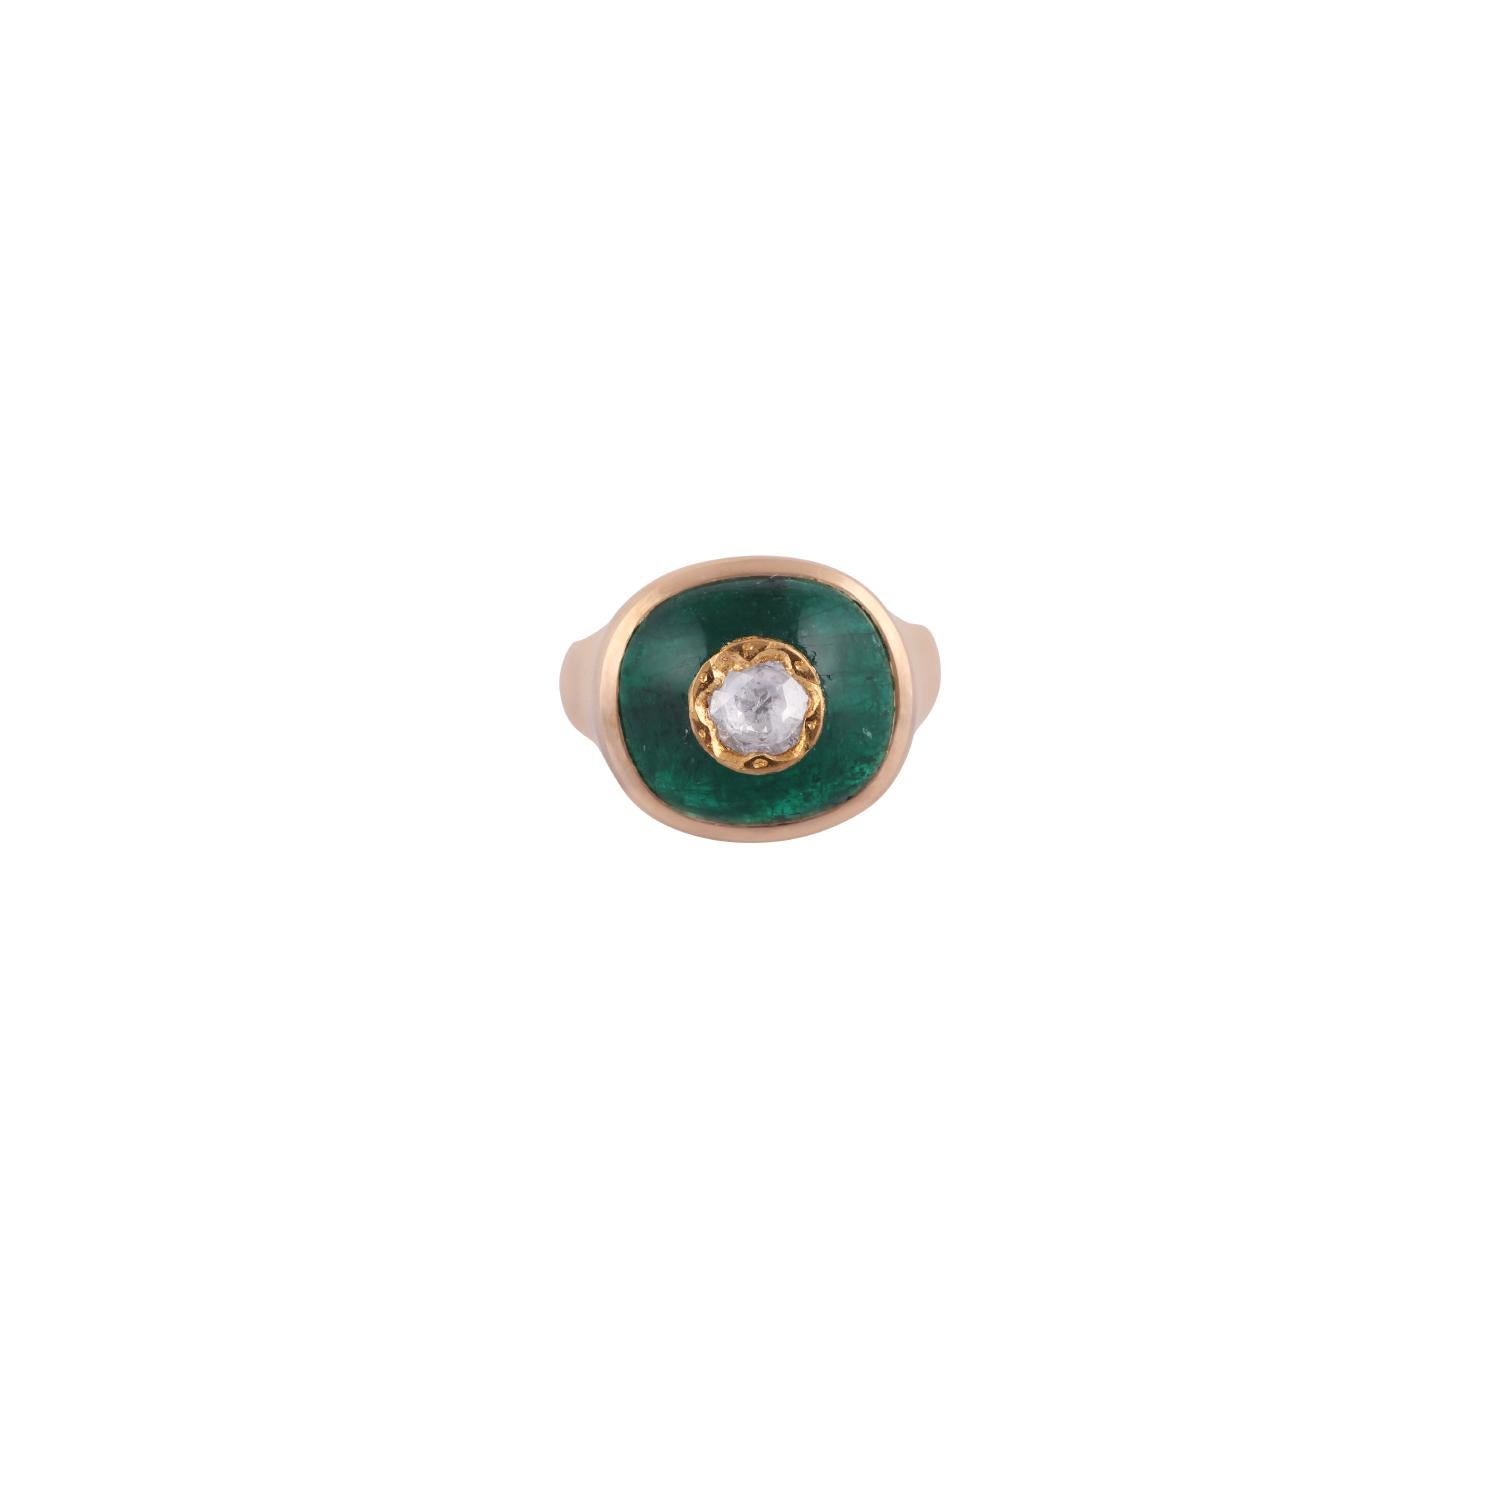 A one of a kind, cabochon Zambian Emerald weighing (13.01 carats) with Inlaid
(O.30 Carat) Diamond on Top .All set in(6.99 Gram) 18K solid Yellow gold with Matt Finish. The center stone Emerald is Inlaid with Diamond  & Emerald is of fine green